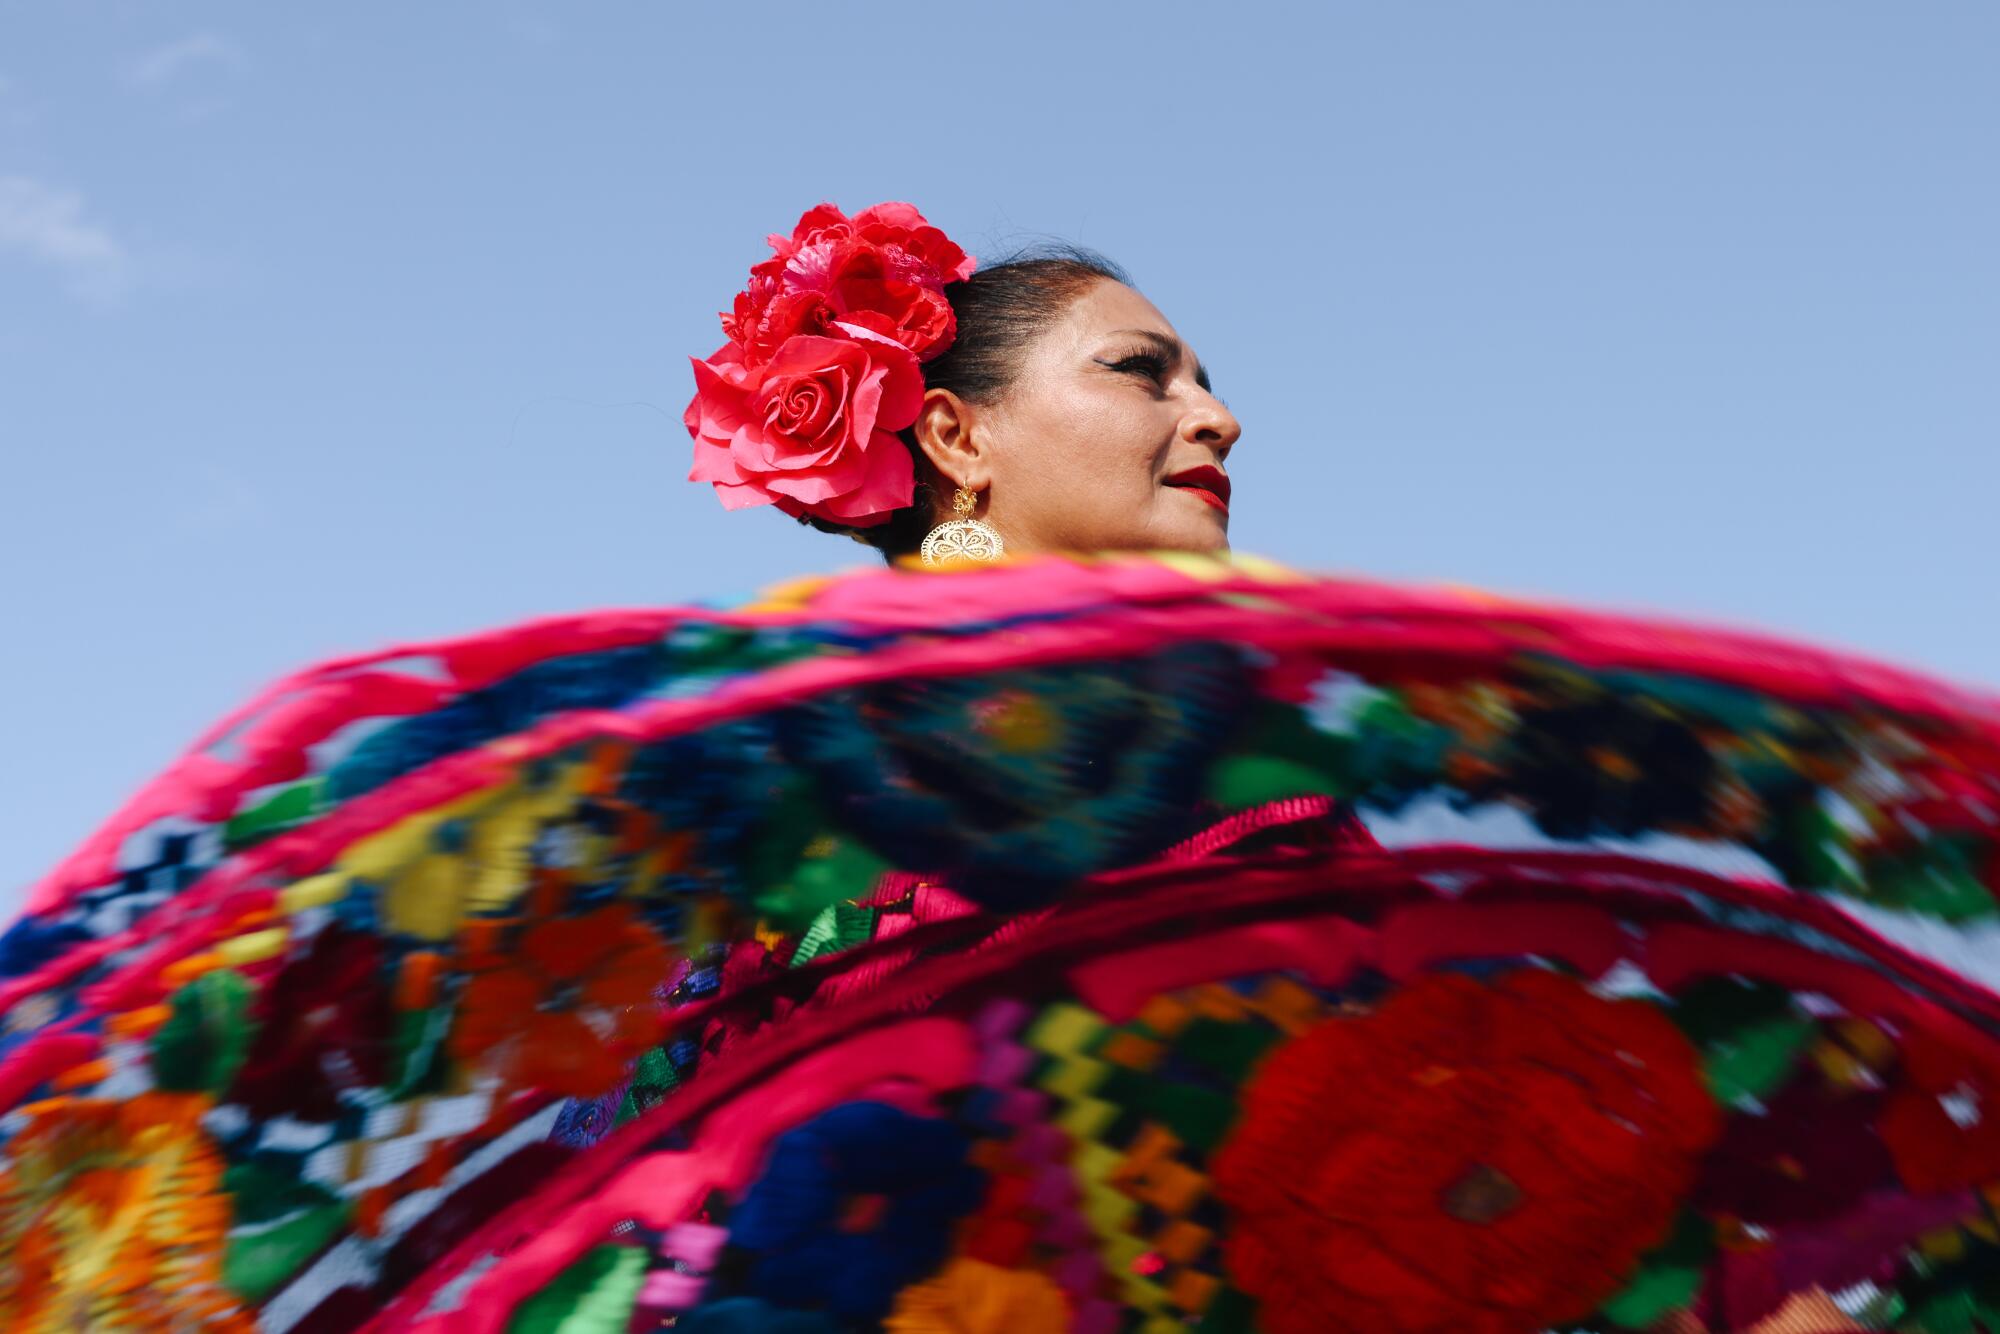 A woman with red roses in her hair twirls her colorful dress as she dances. 